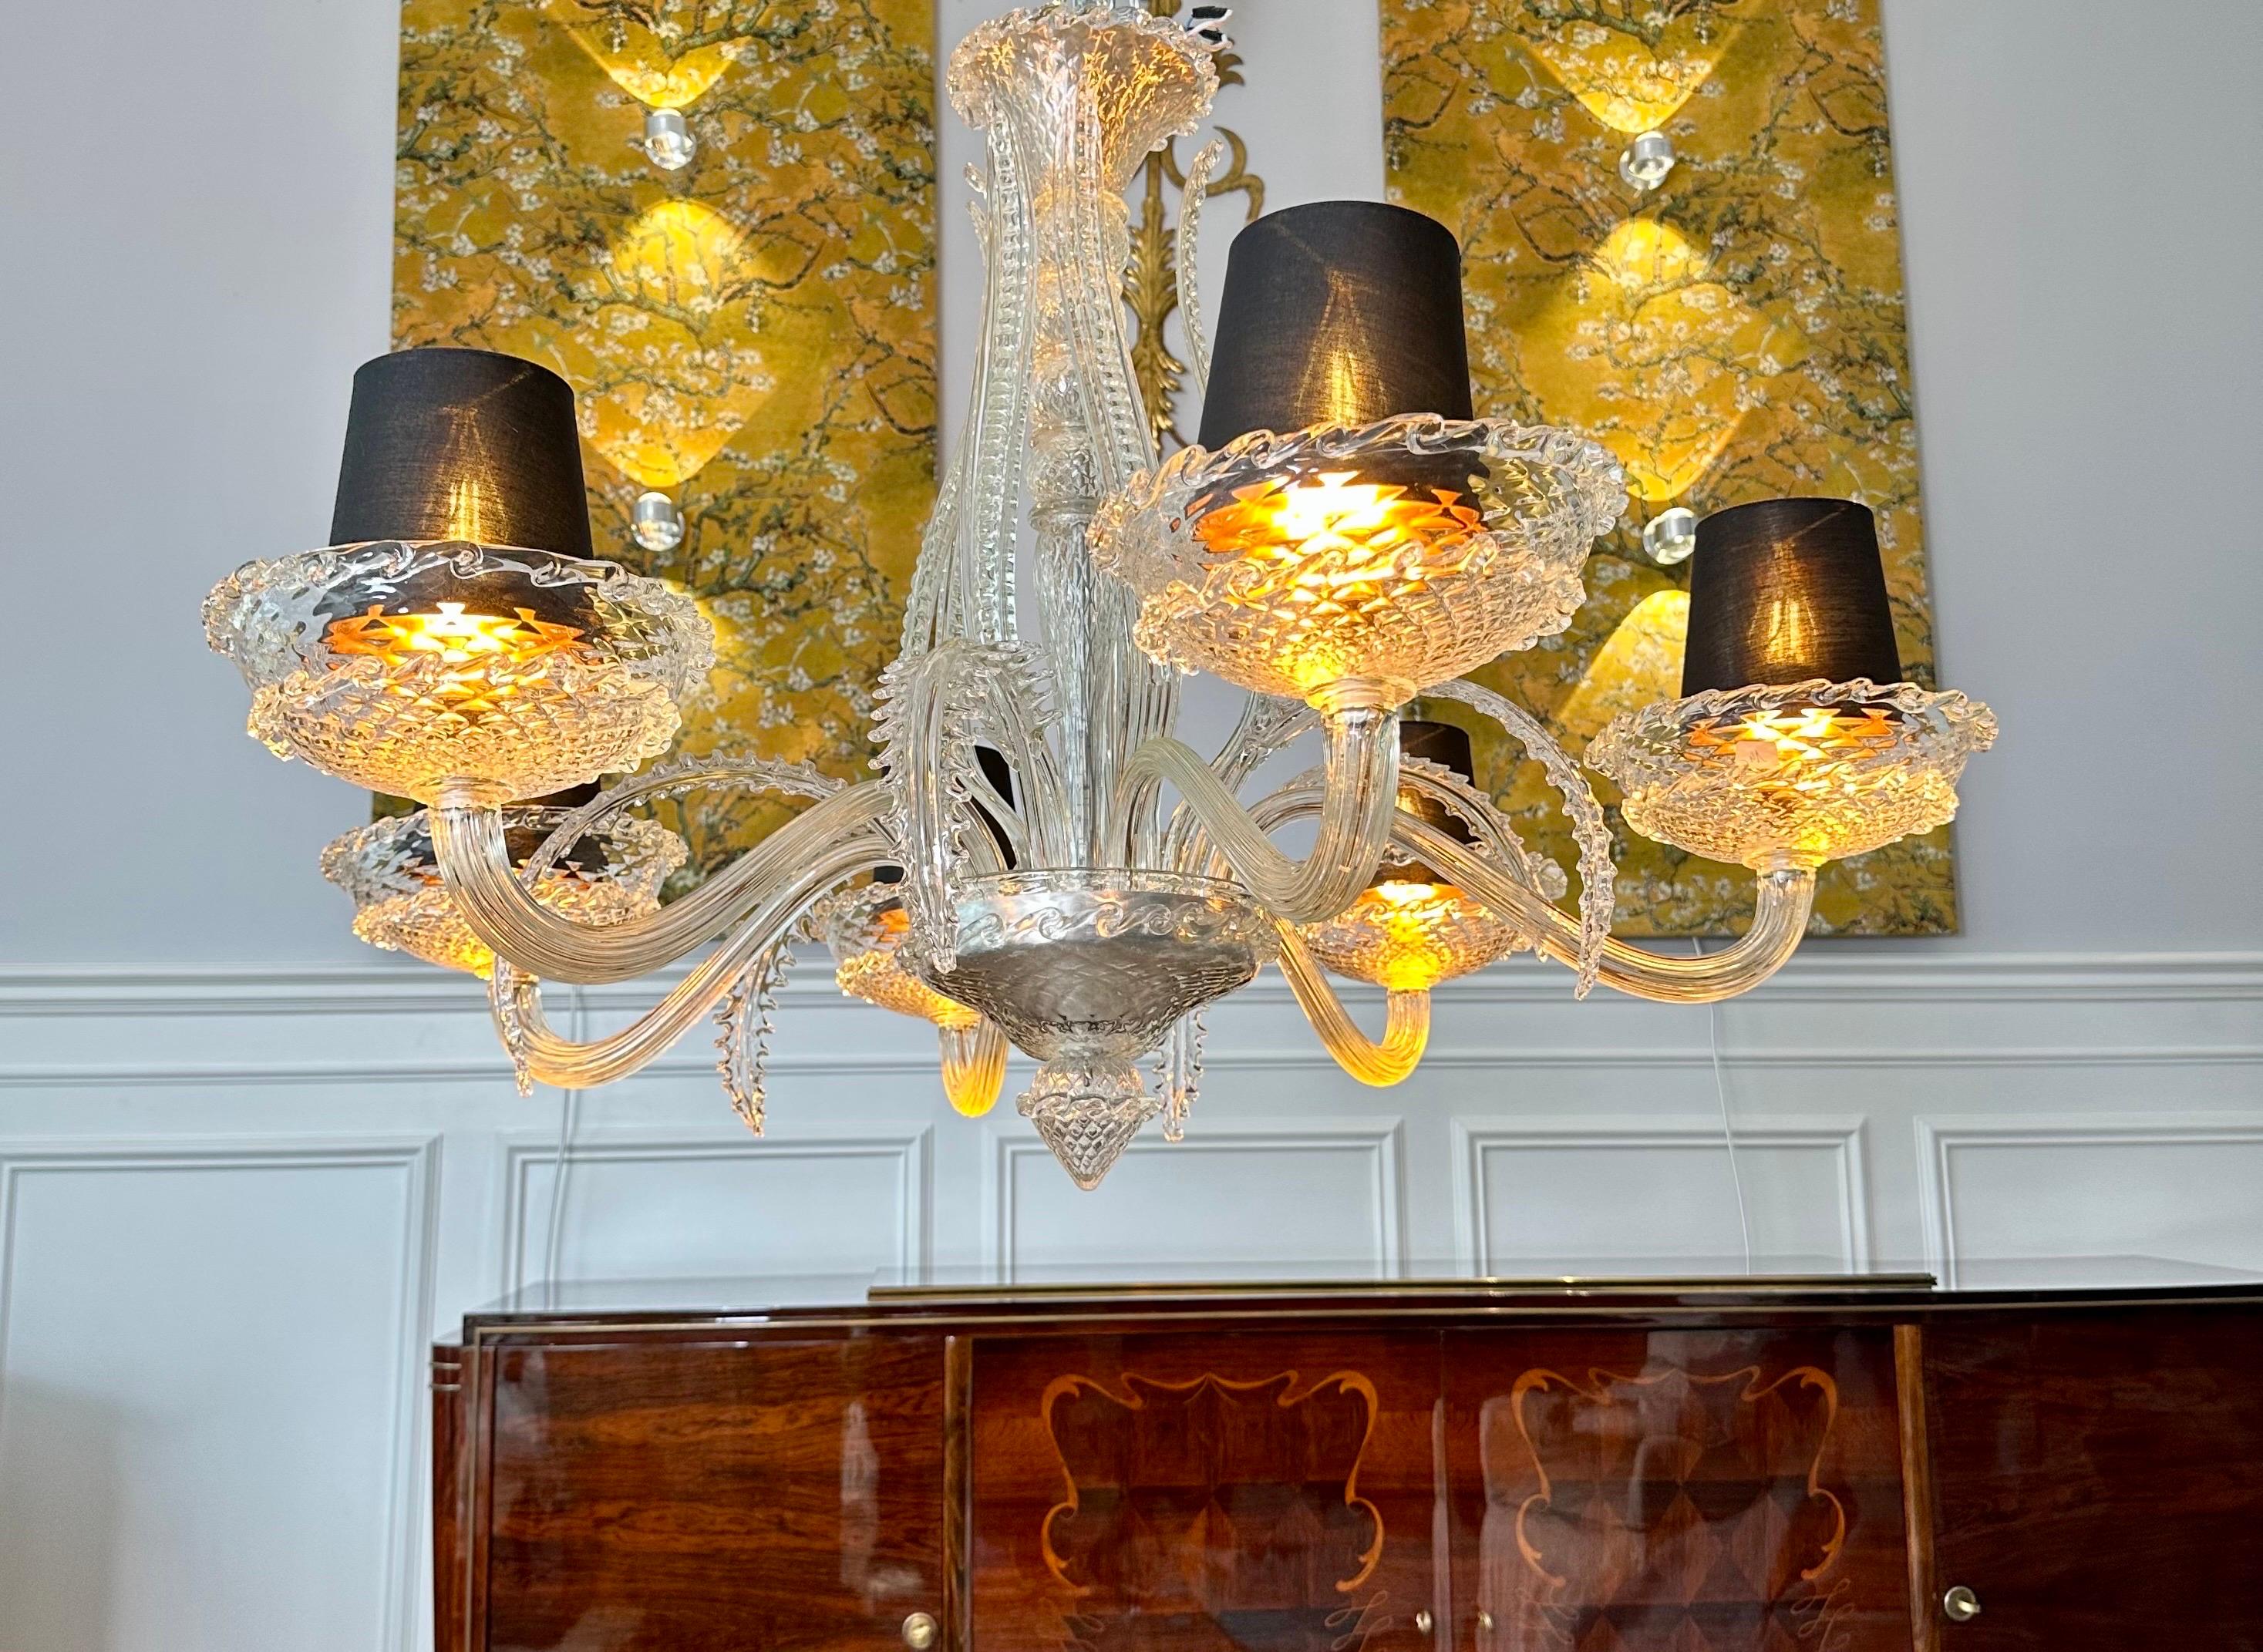 This translucent blown glass chandelier with 6 sconces dates from the late 1930s and early 1940s. It was produced by the Veronese house and Attributed to André Arbus. 
Morano glass and crystal. It is made up of 6 large sconces adorned with large